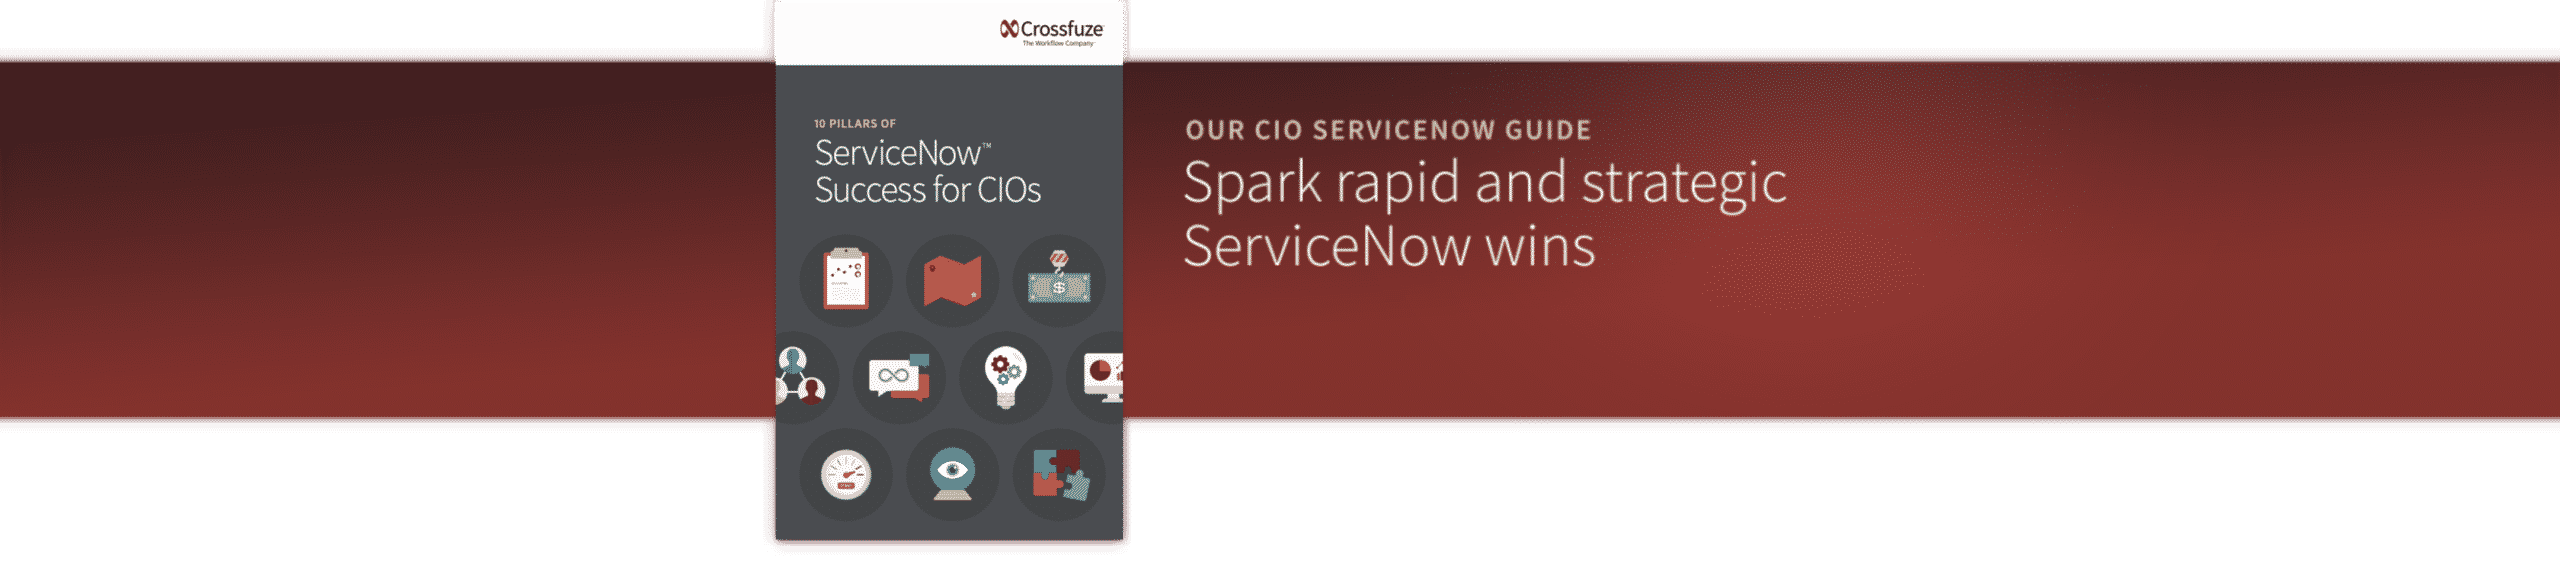 10 Pillars of ServiceNow Success for CIOs Long Banner - Crossfuze